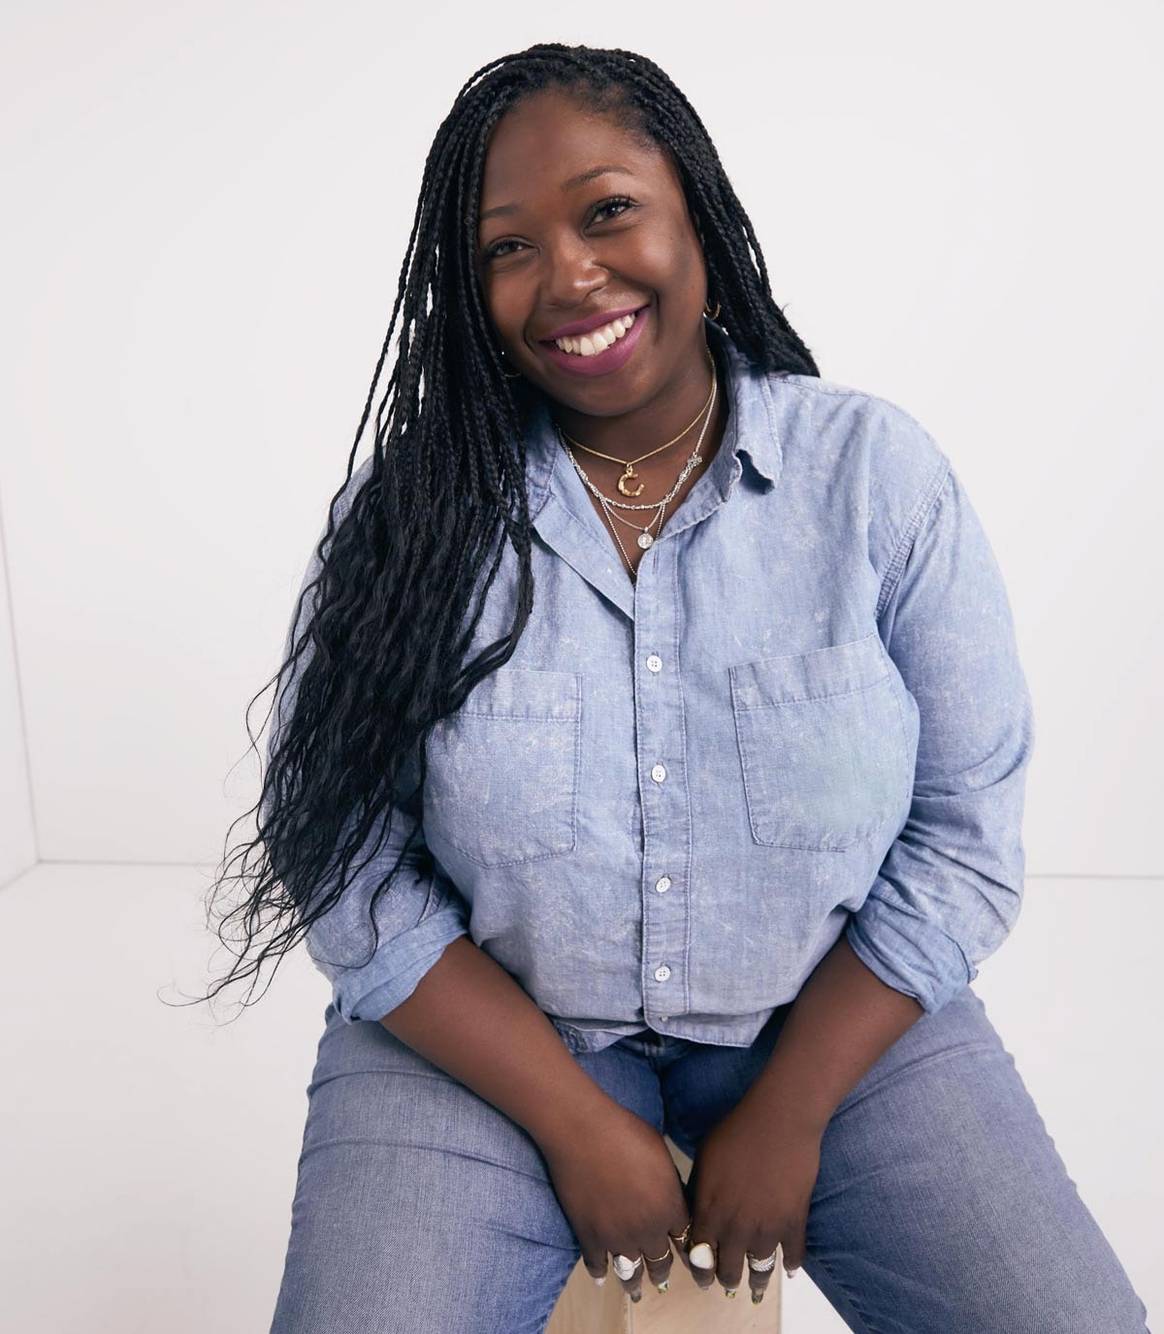 Interview: Chei Burris, Recruiting Manager at Lucky Brand